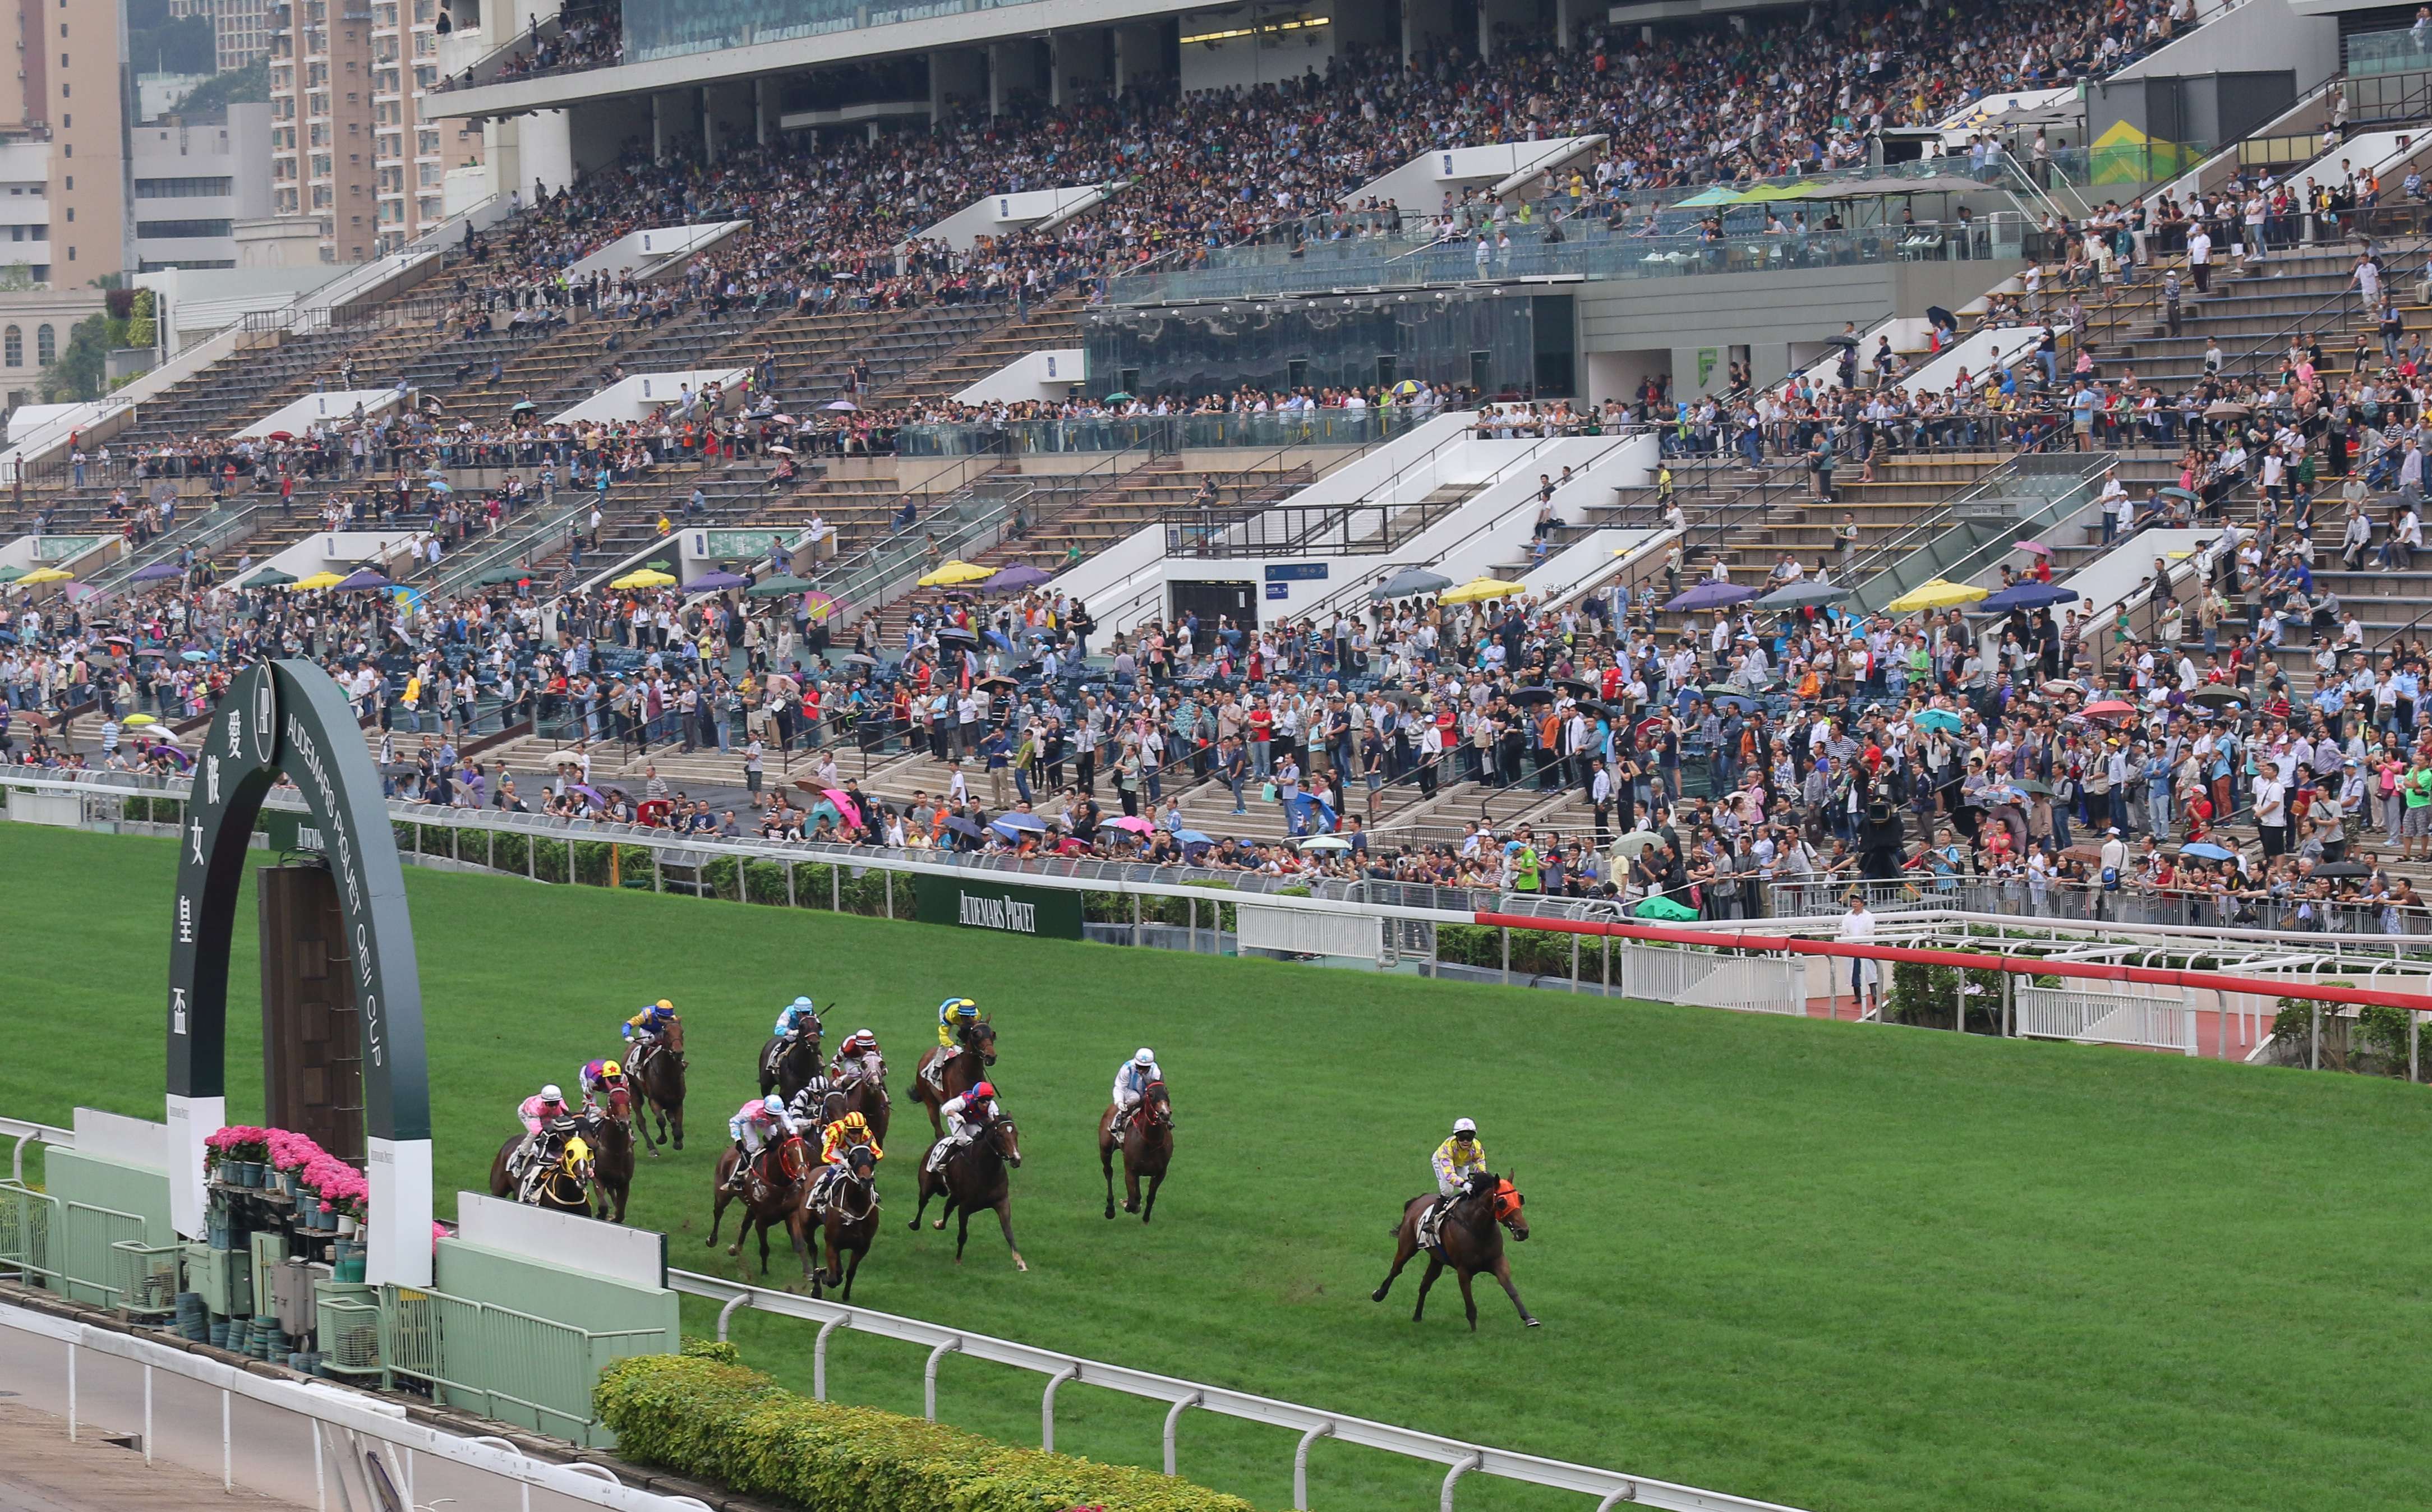 Despite wild weather, crowds flocked to Sha Tin for QE II Cup day and Champions Mile day.